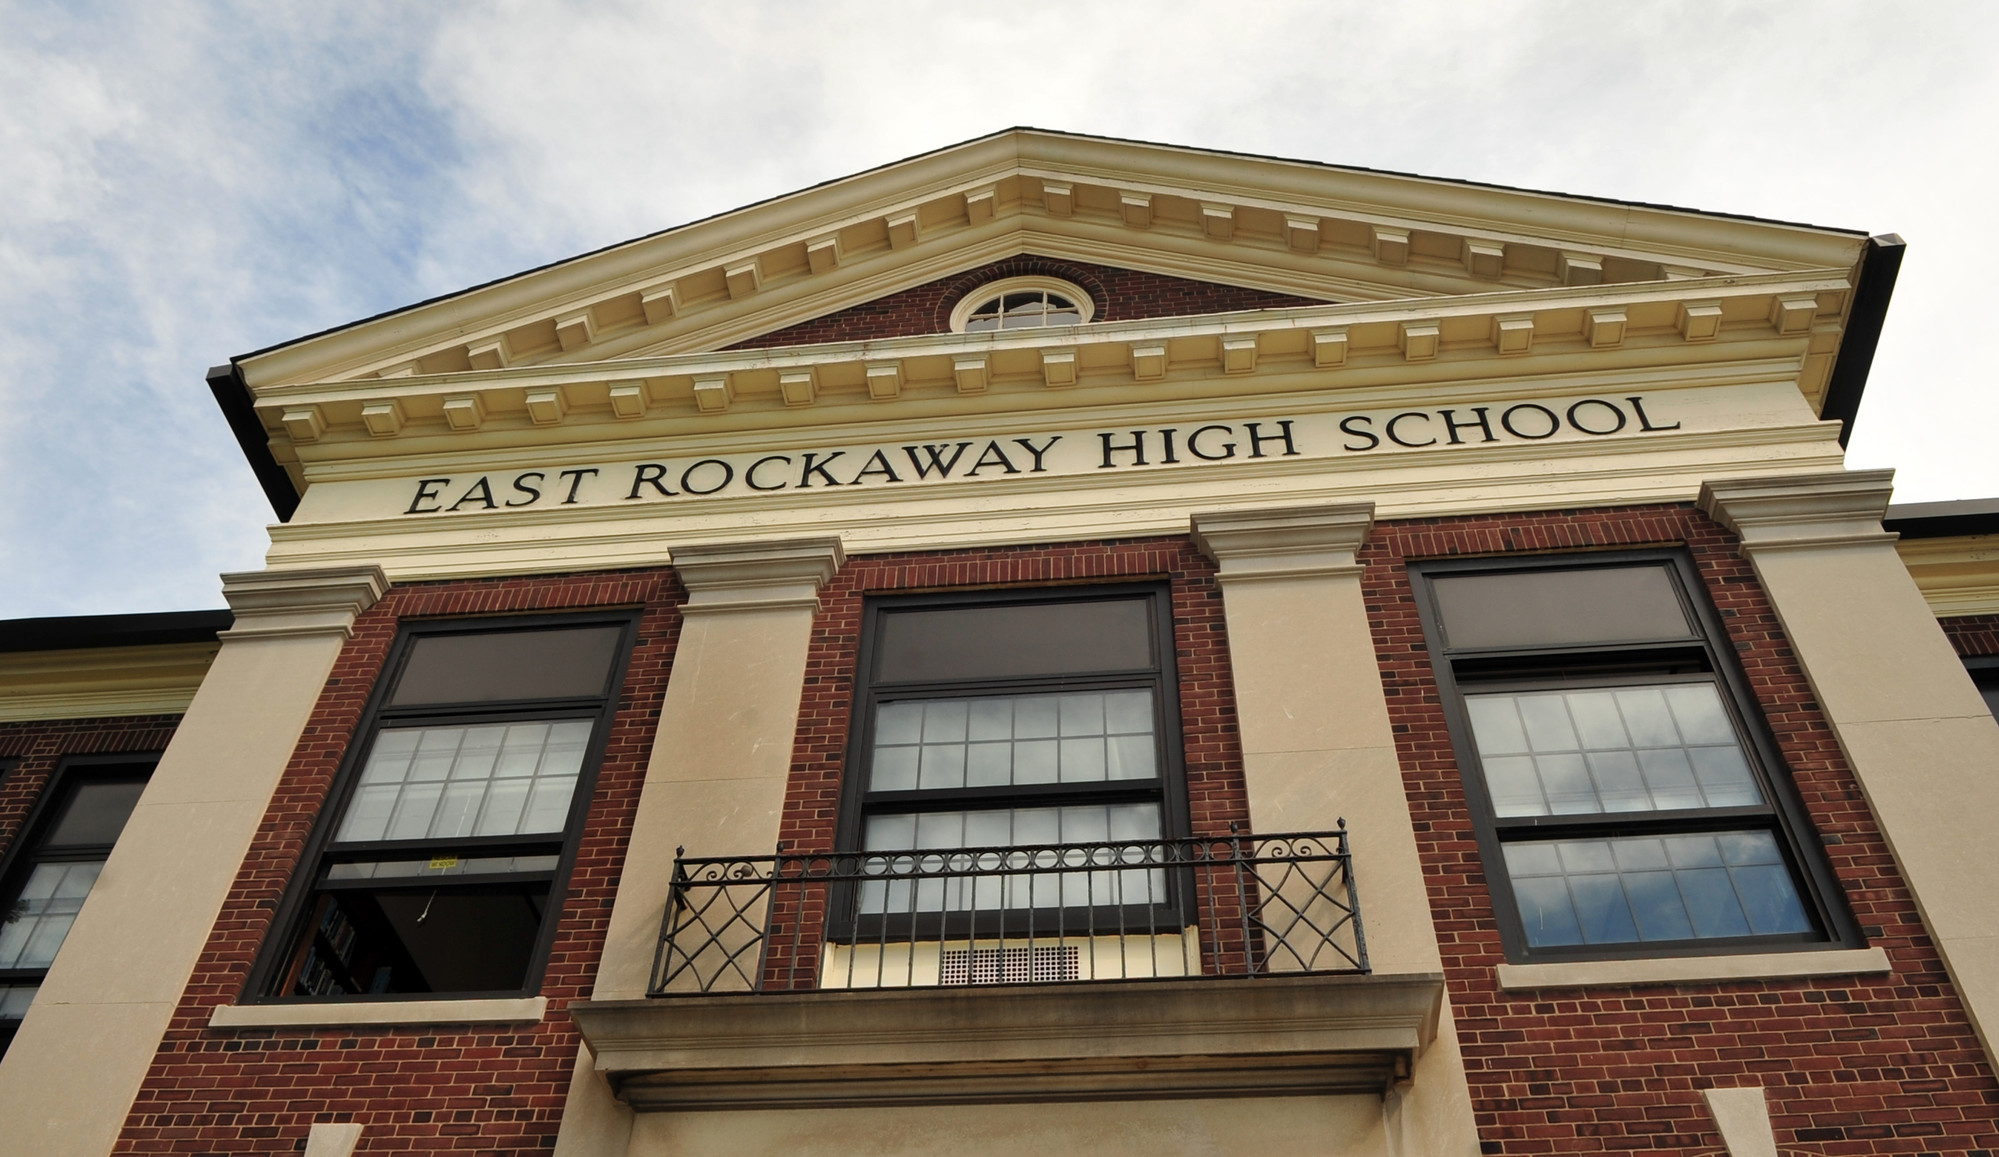 Former PTA President Theresa Devlin and former Athletic Director Dom Vulpis are vying for the vacant seat on the East Rockaway Board of Education.